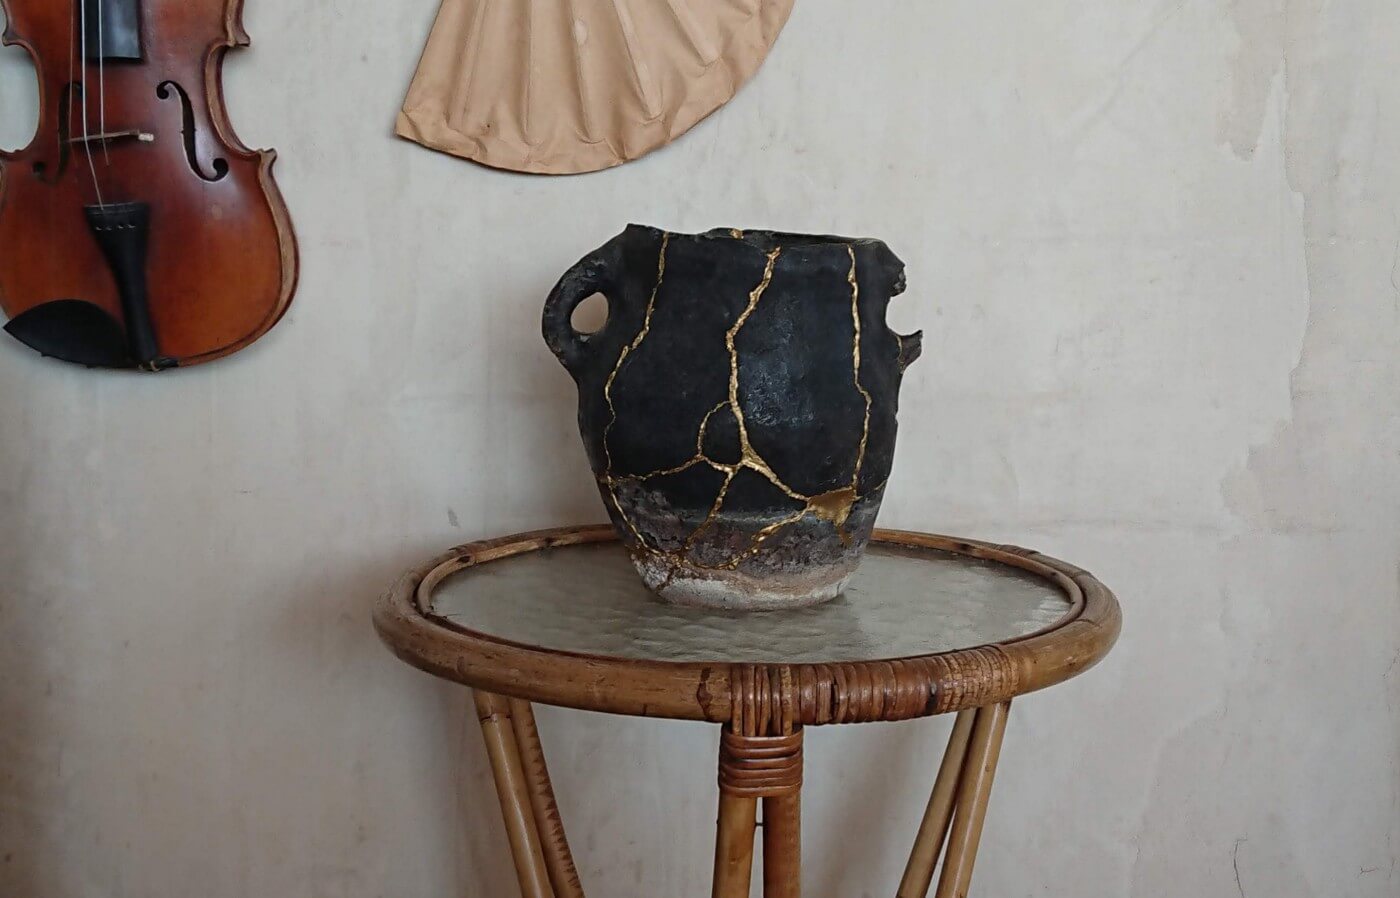 Japanese pot on a wicker repaired using Kintsugi technique with gold joining the broken black pieces together Image By Gugger— Own work, CC BY-SA 4.0, https://commons.wikimedia.org/wiki/File:Kintsugi.jpg